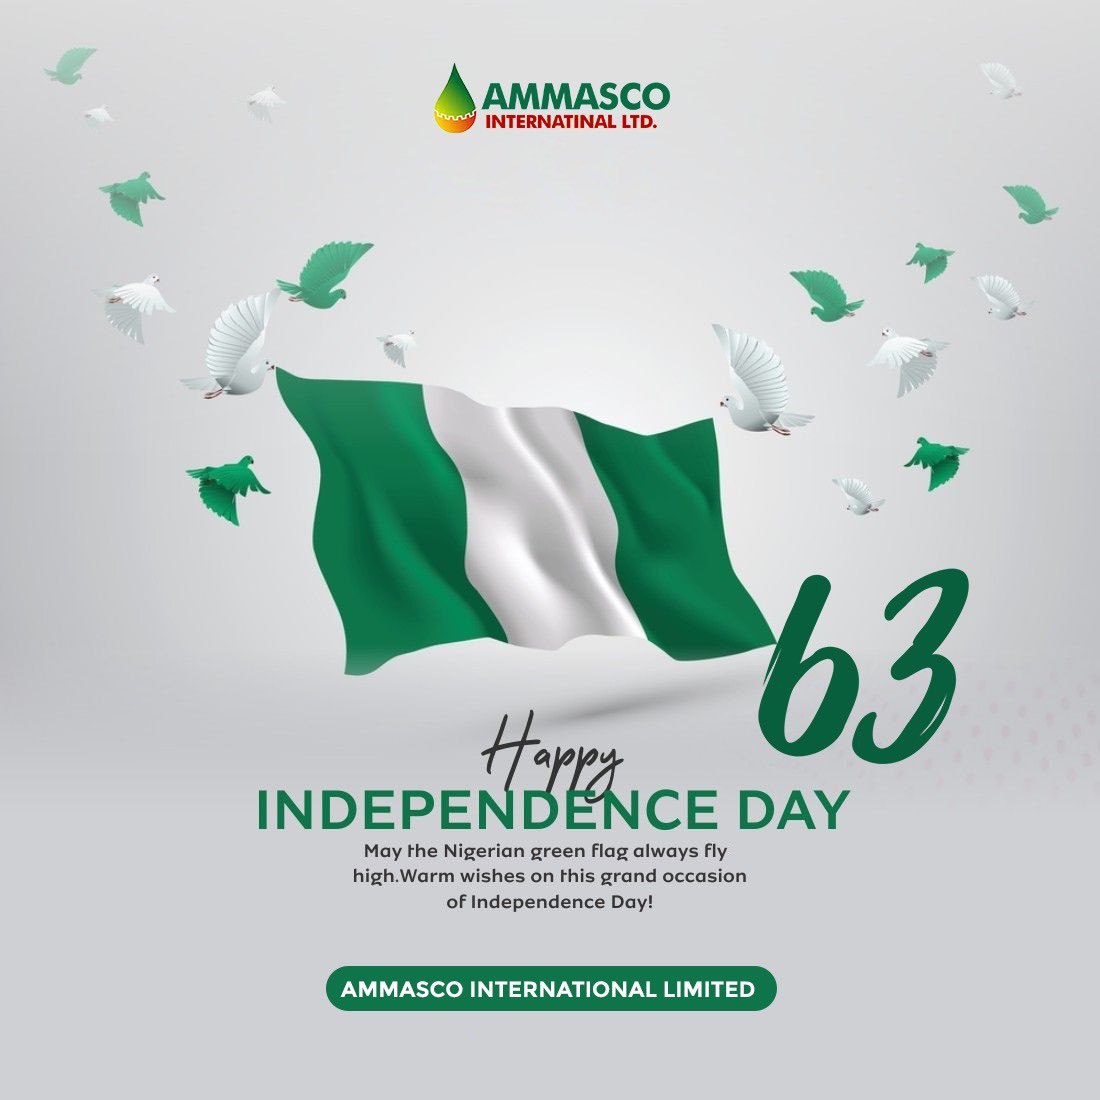 HAPPY INDEPENDENCE DAY NIGERIA. 
May the Nigerian green flag always fly high. Warm wishes on this grand occasion of Independence Day!

#EngineOil #MotorOil #SyntheticOil #ConventionalOil #HighMileageOil #OilChange #EngineLubrication #EnginePerformance #FrictionReduction